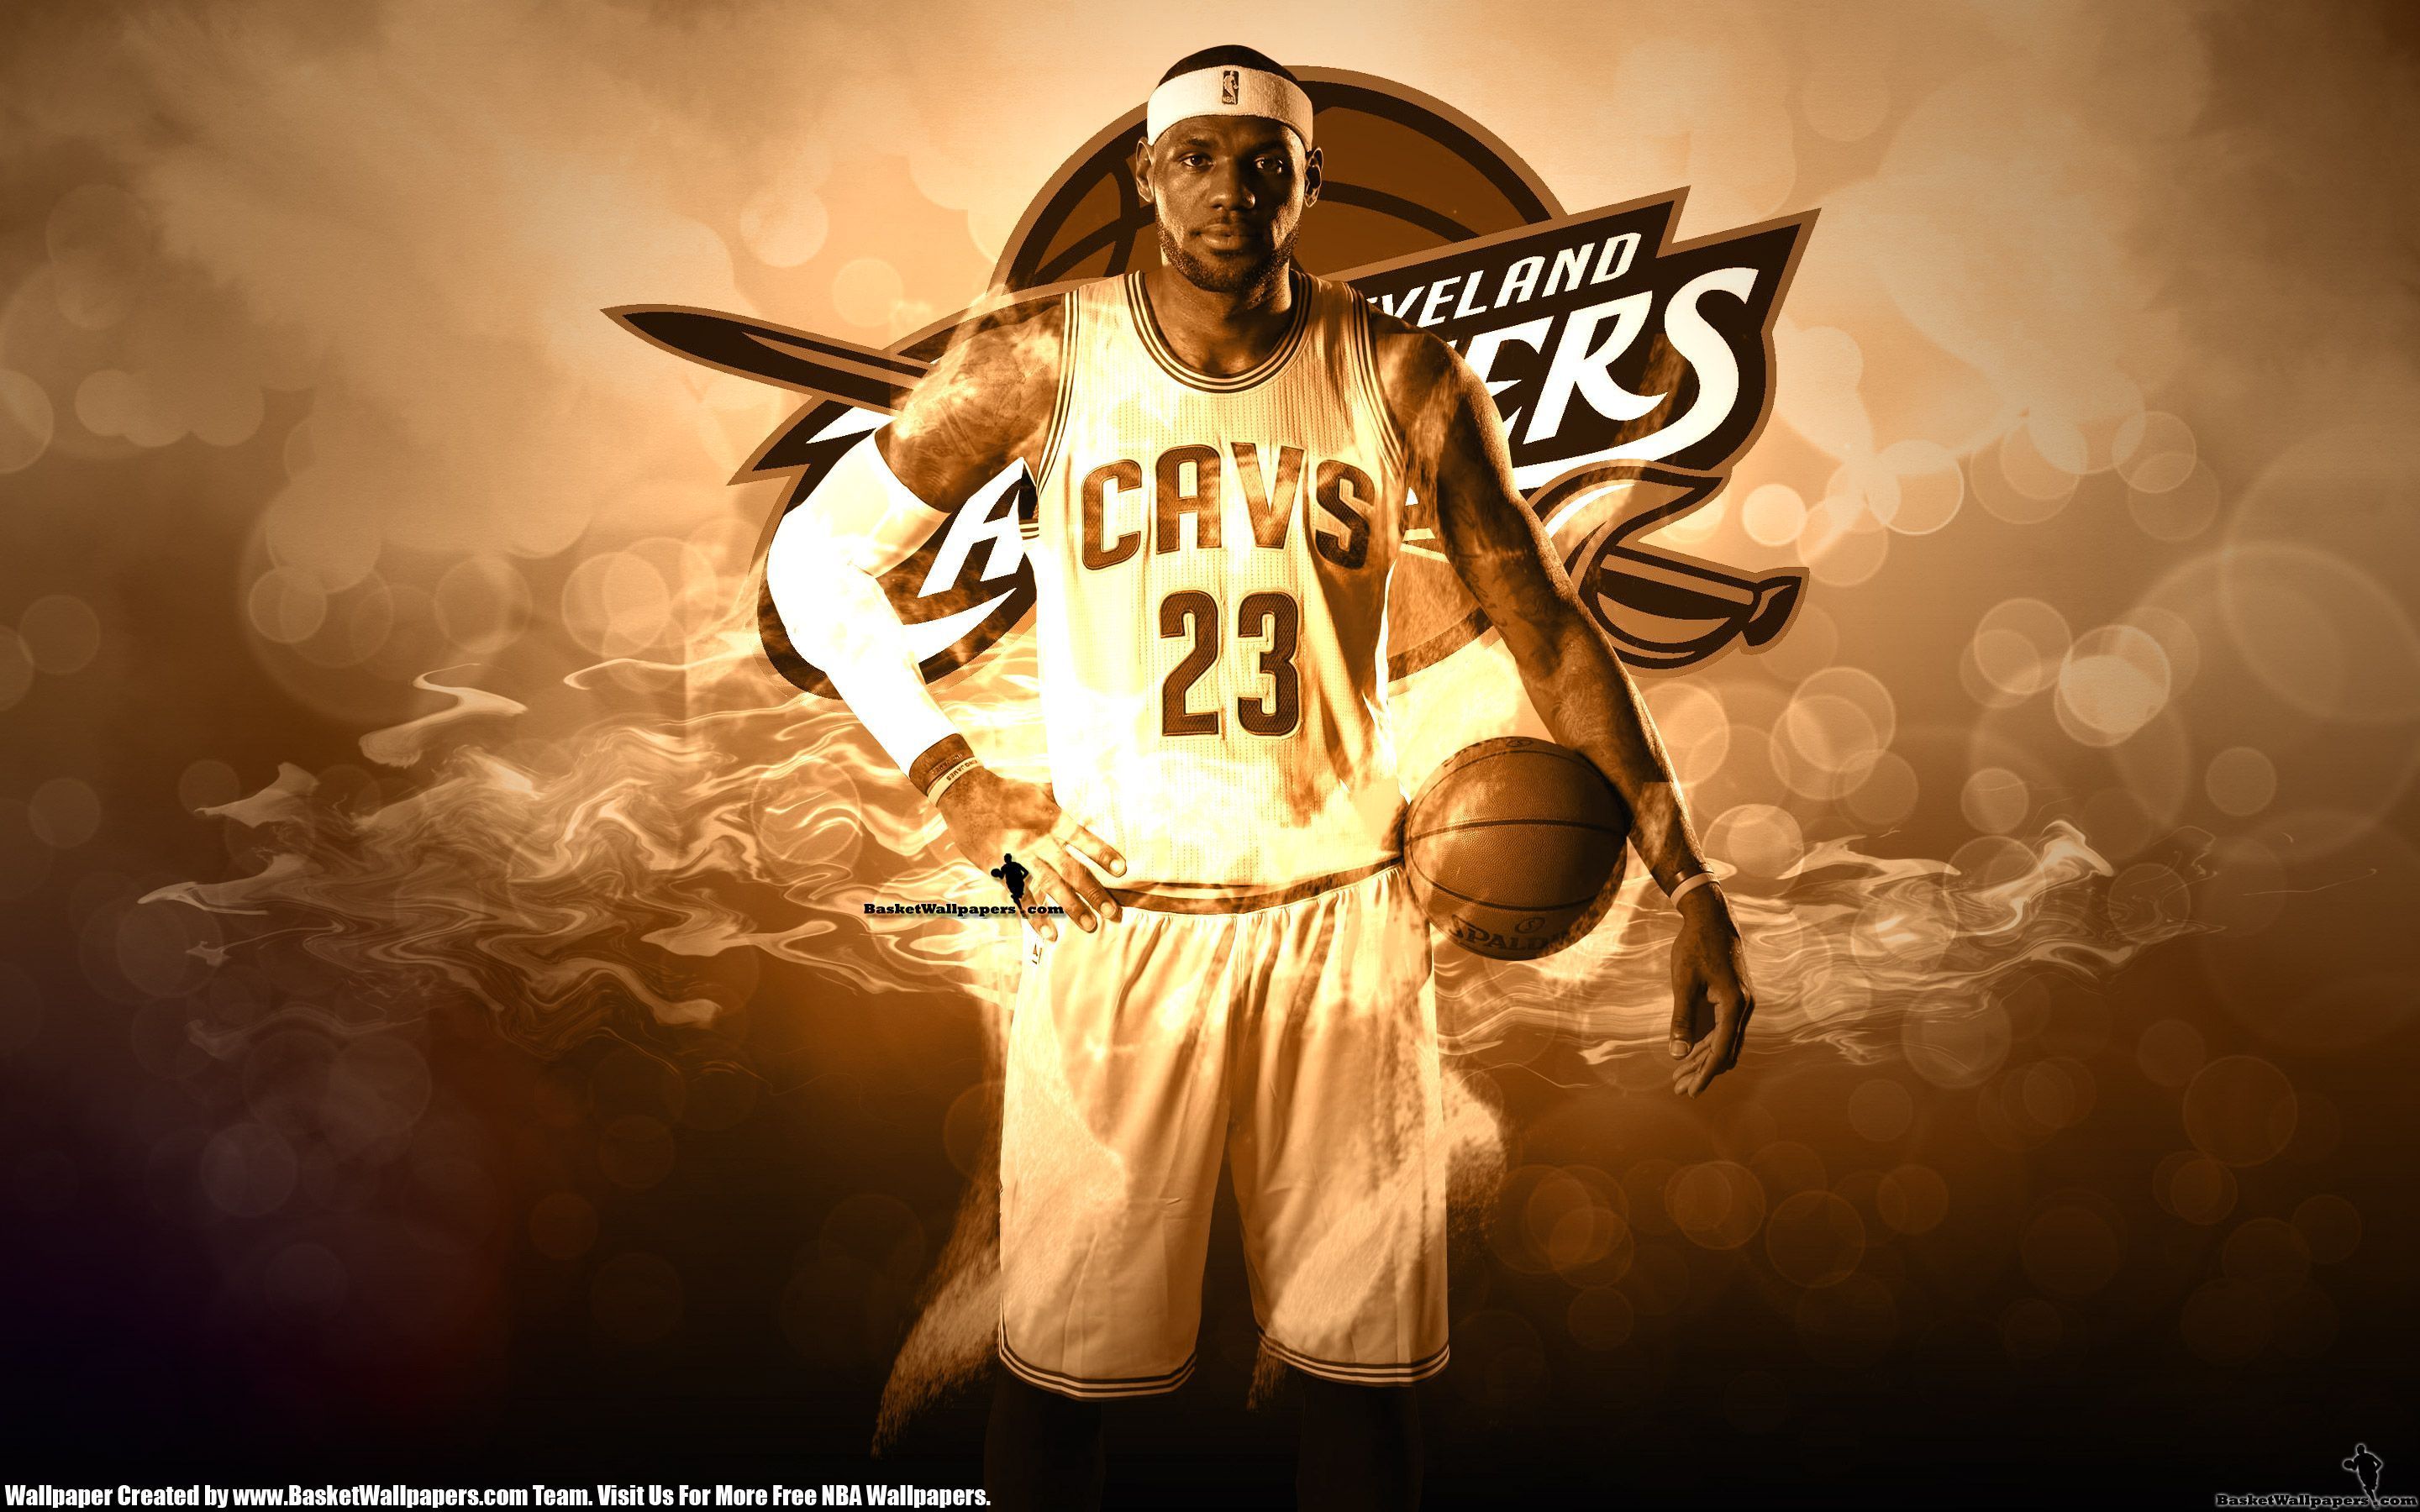 Cleveland Cavaliers Wallpapers | Basketball Wallpapers at ...